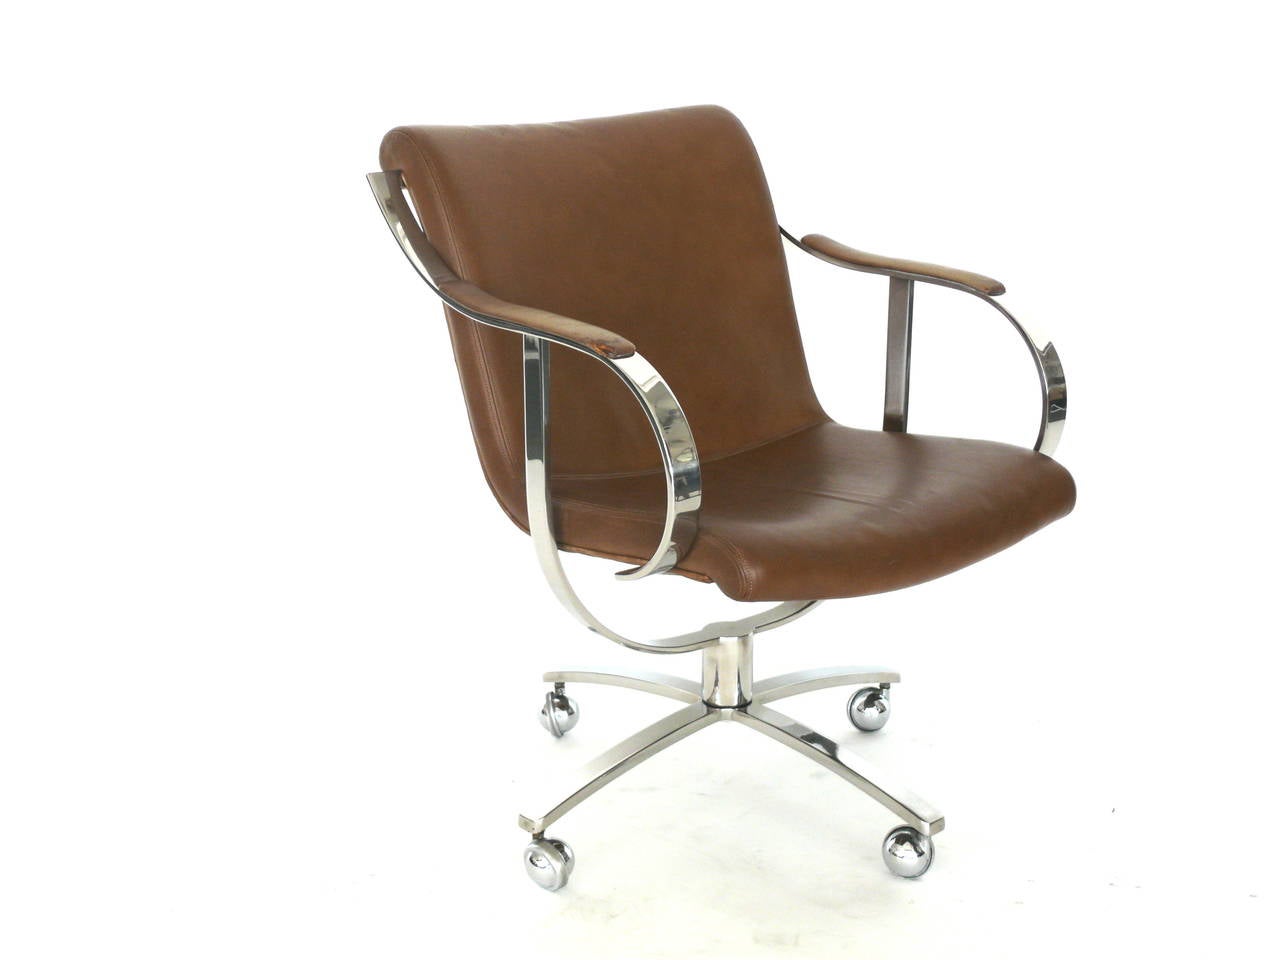 Handsome leather and stainless steel office chair by Gardner Leaver for Steelcase. Curved arms and U-shaped bracket add great design. New casters. Two chairs available. Each in their own vintage condition.